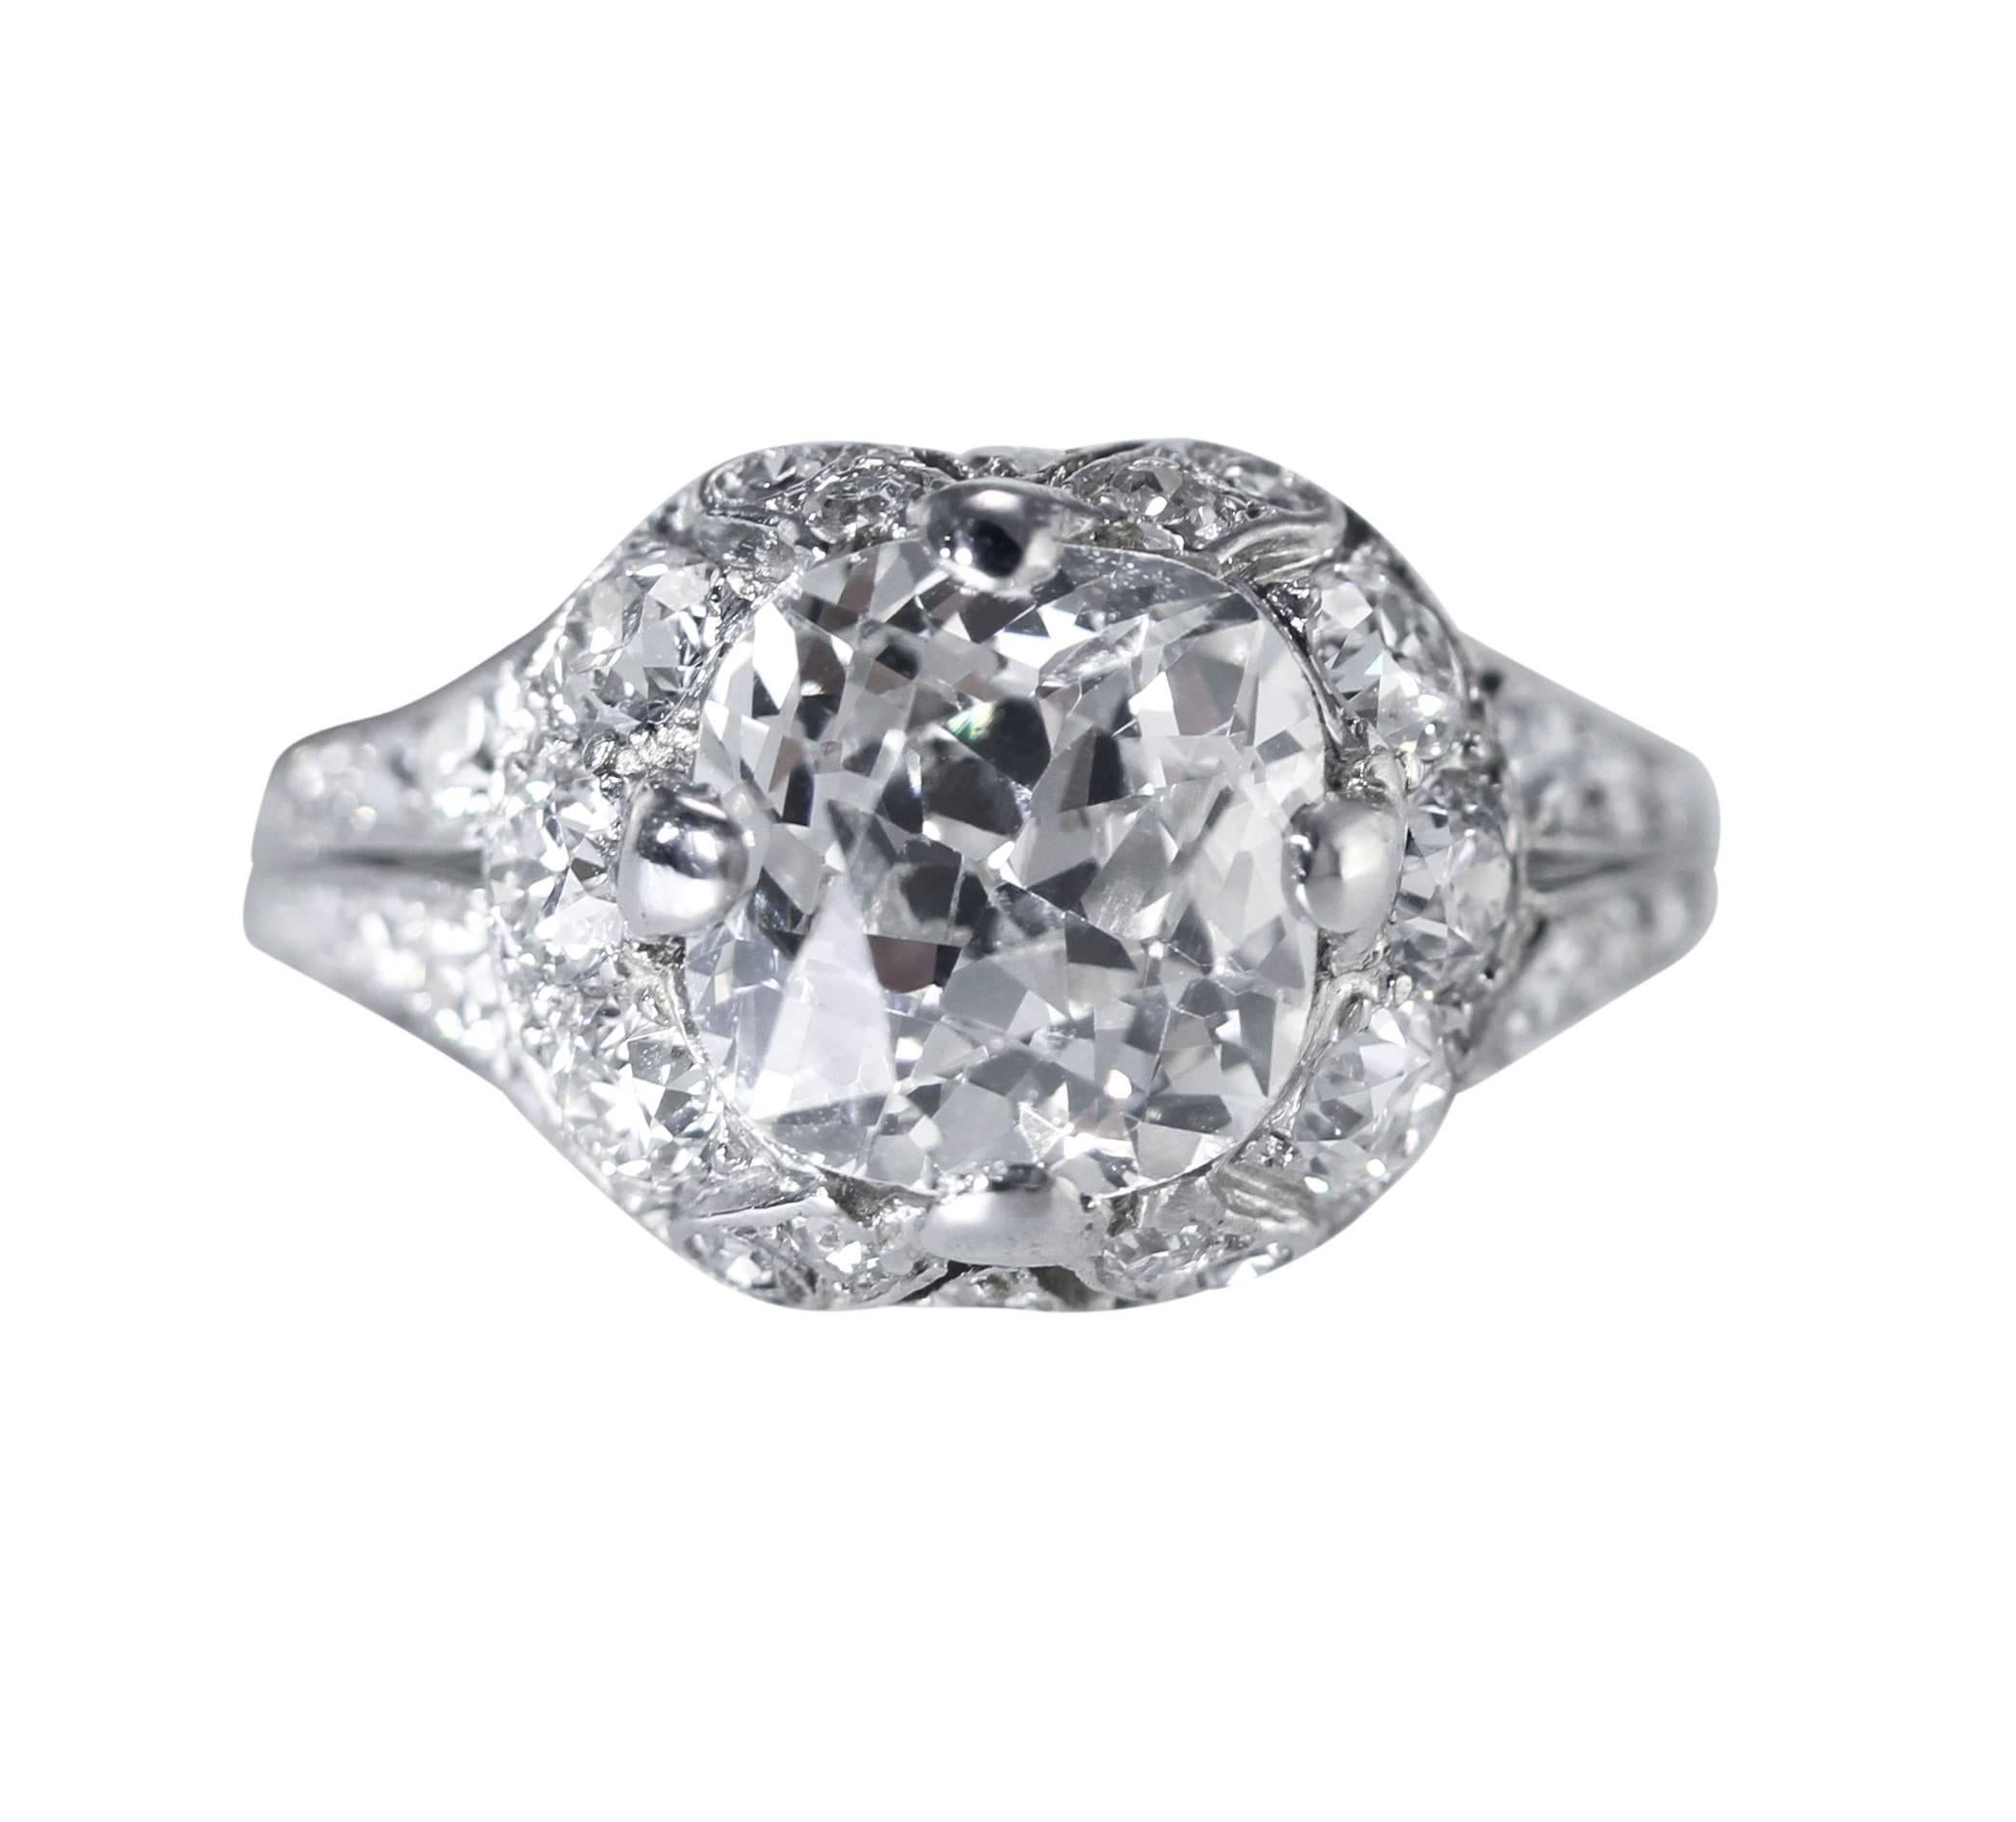 Genuine Edwardian platinum and diamond ring, set in the center with an old mine-cut diamond weighing 2.38 carats, within ornate openwork mounting set with 6 old European-cut and 26 single-cut diamonds weighing approximately 0.50 carat, gross weight